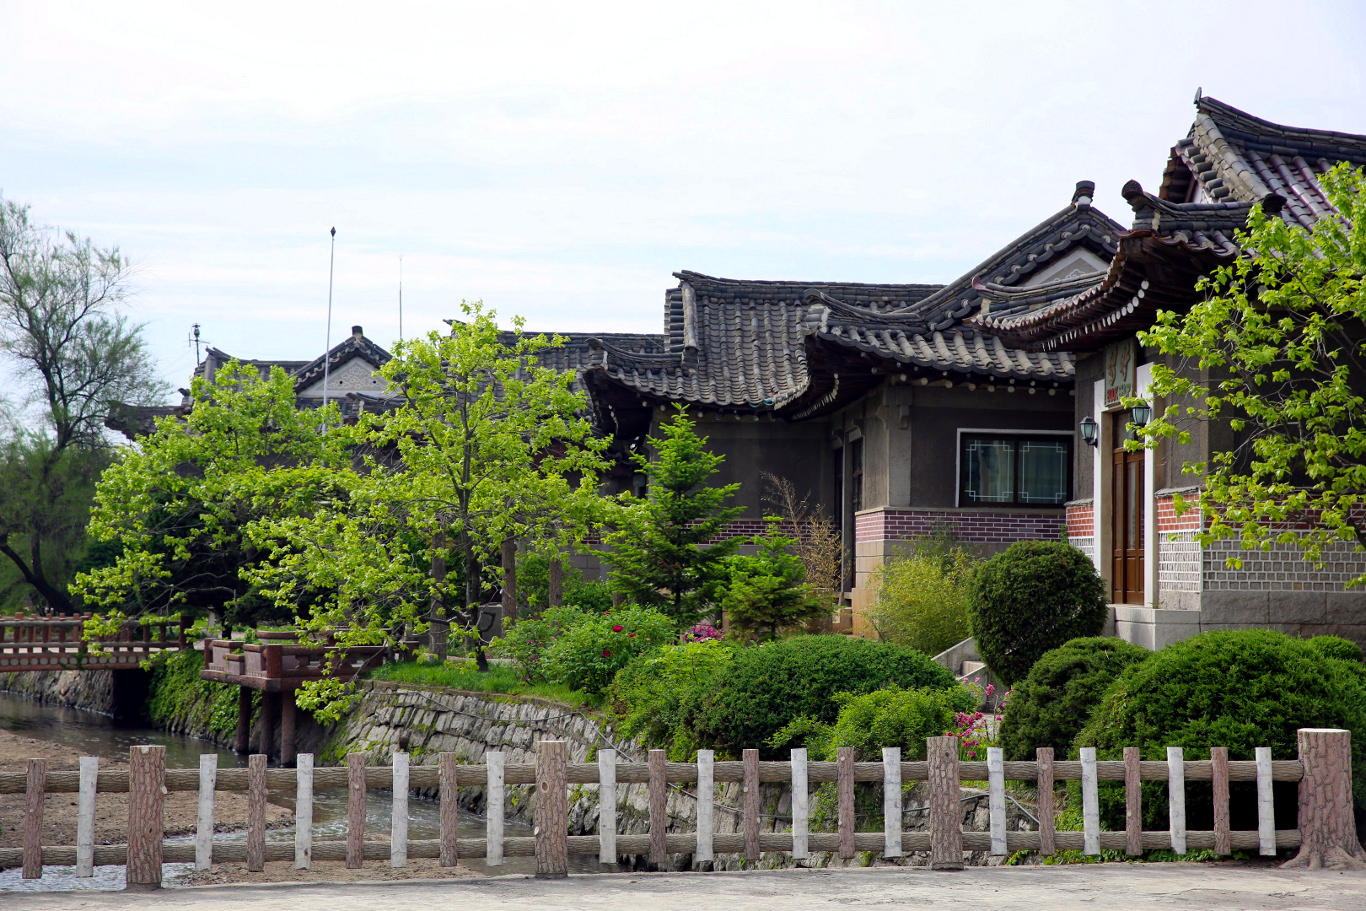 Minsok Folk Hotel in Kaesong, North Korea. This courtyard hotel is located in the old part of town. Picture taken by KTG Tours